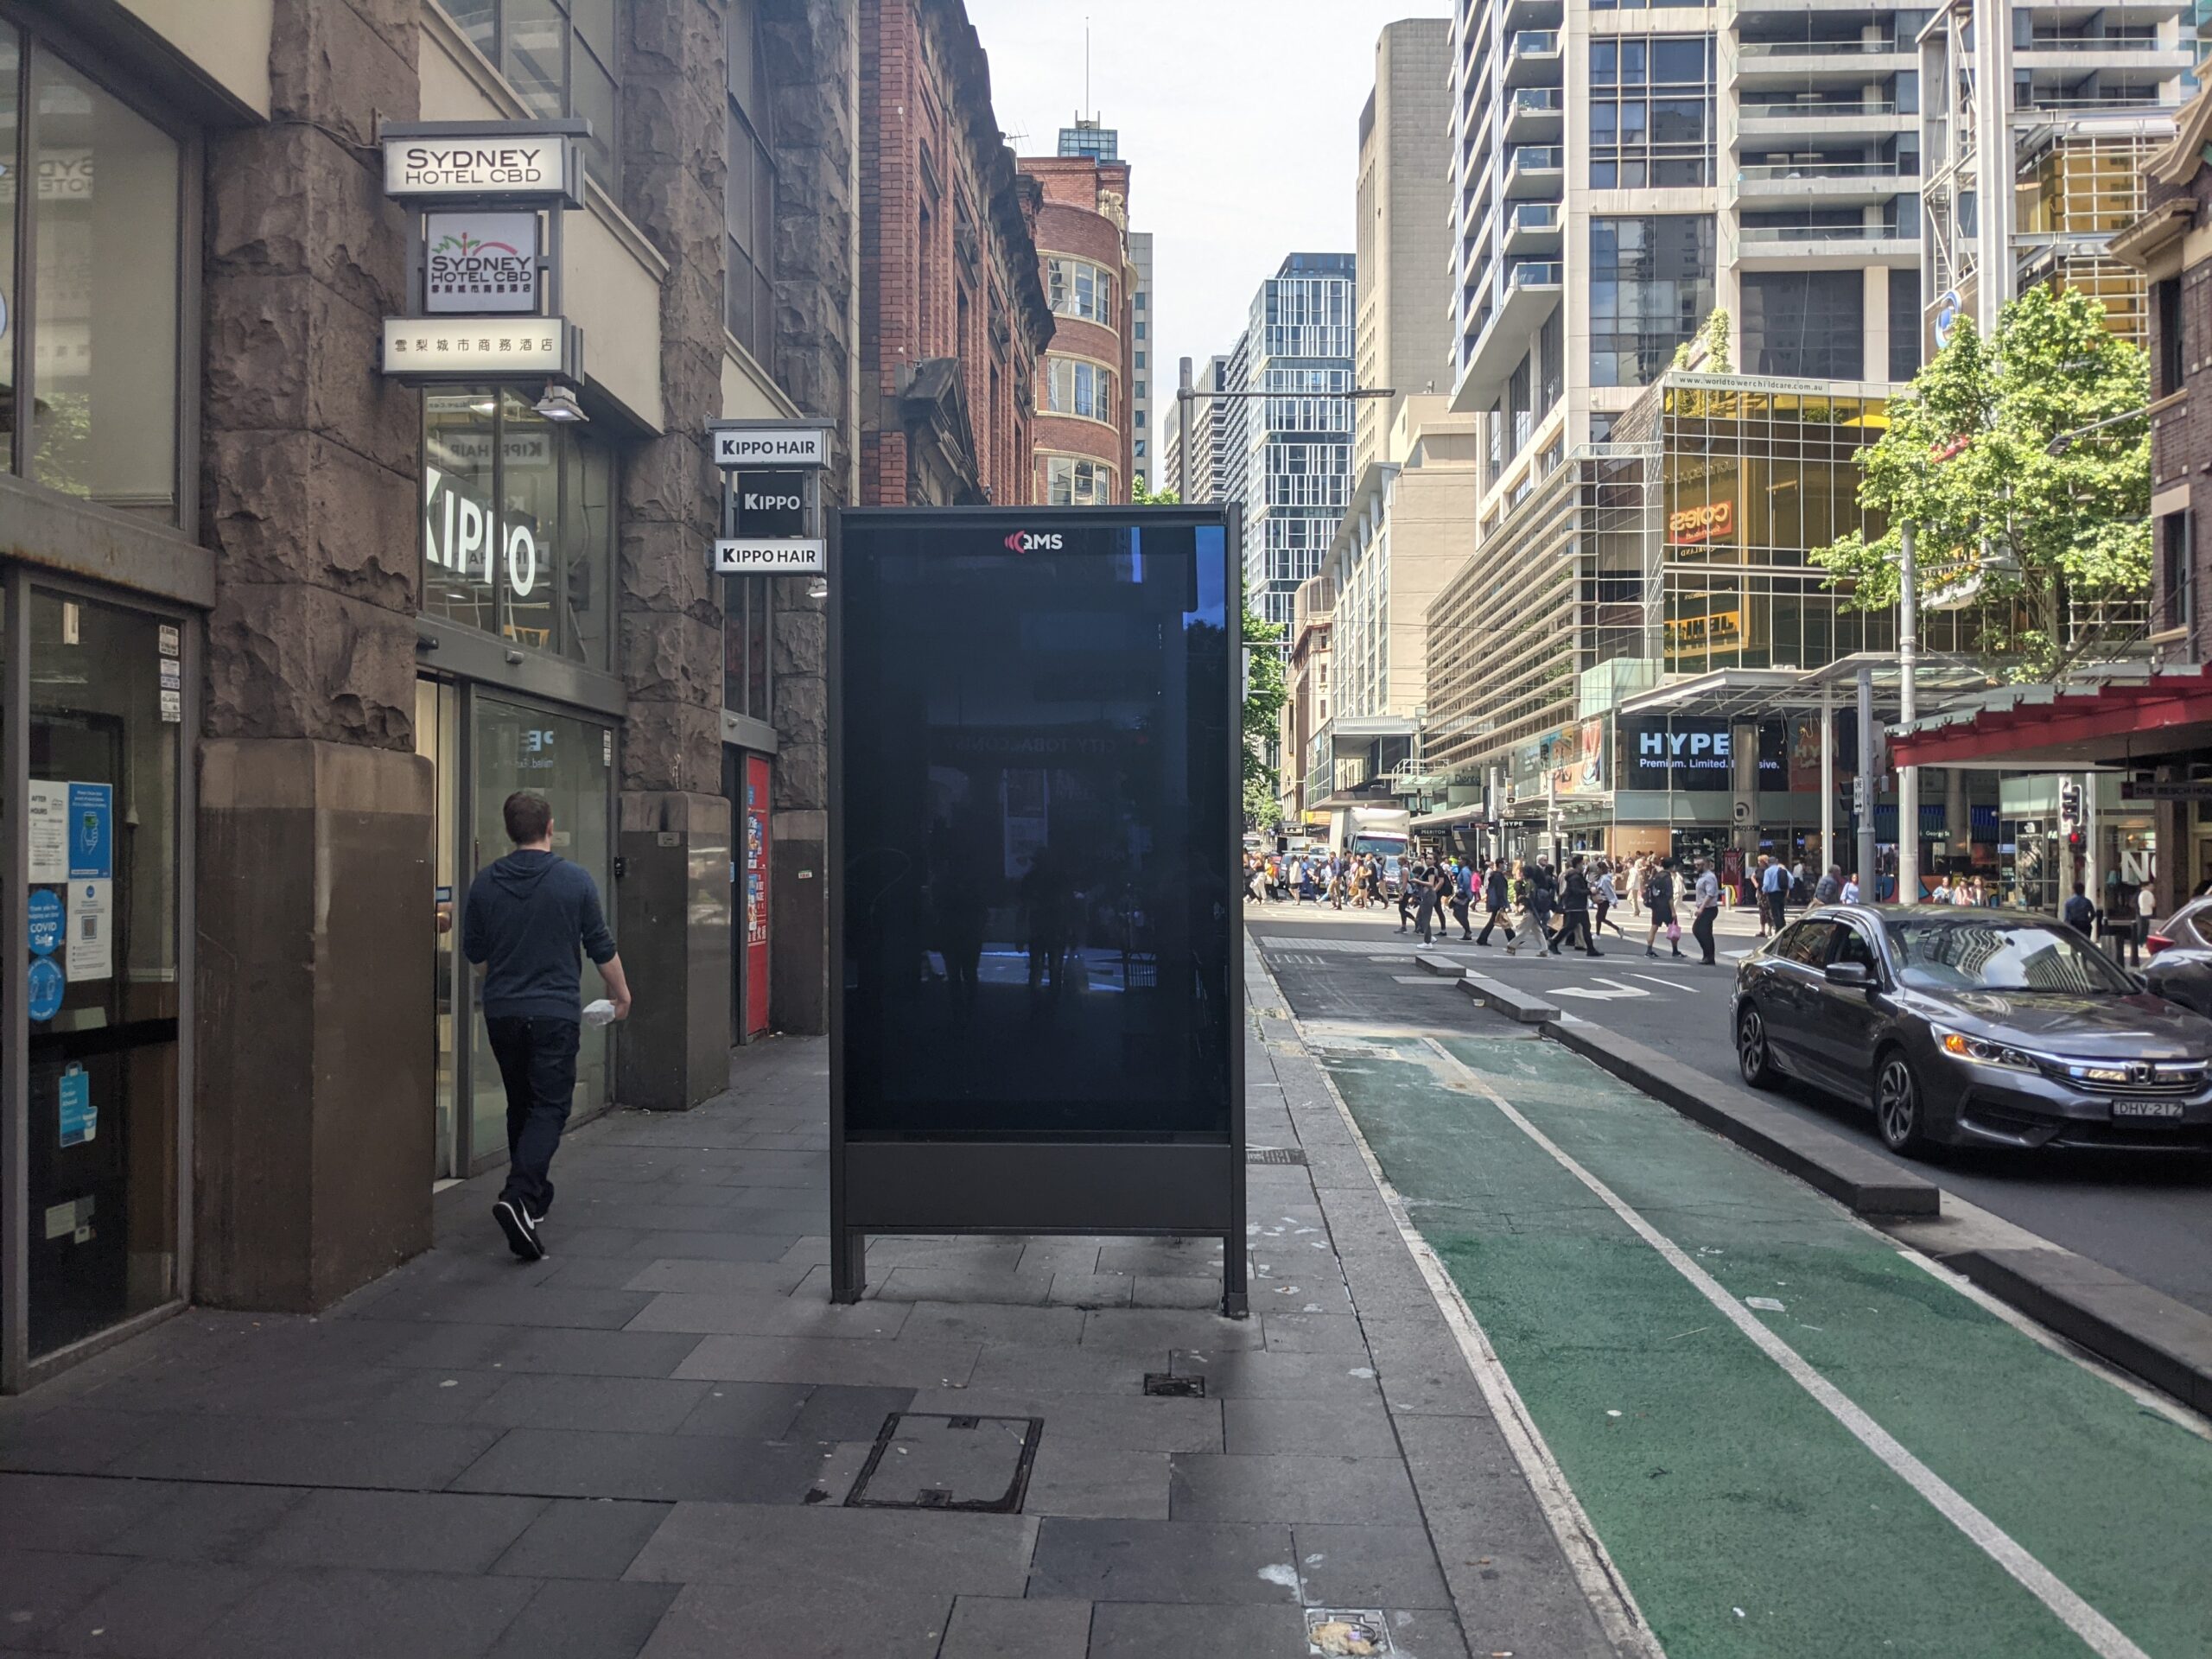 Mapping Sydney Billboards: Every QMS advertising panel in Sydney